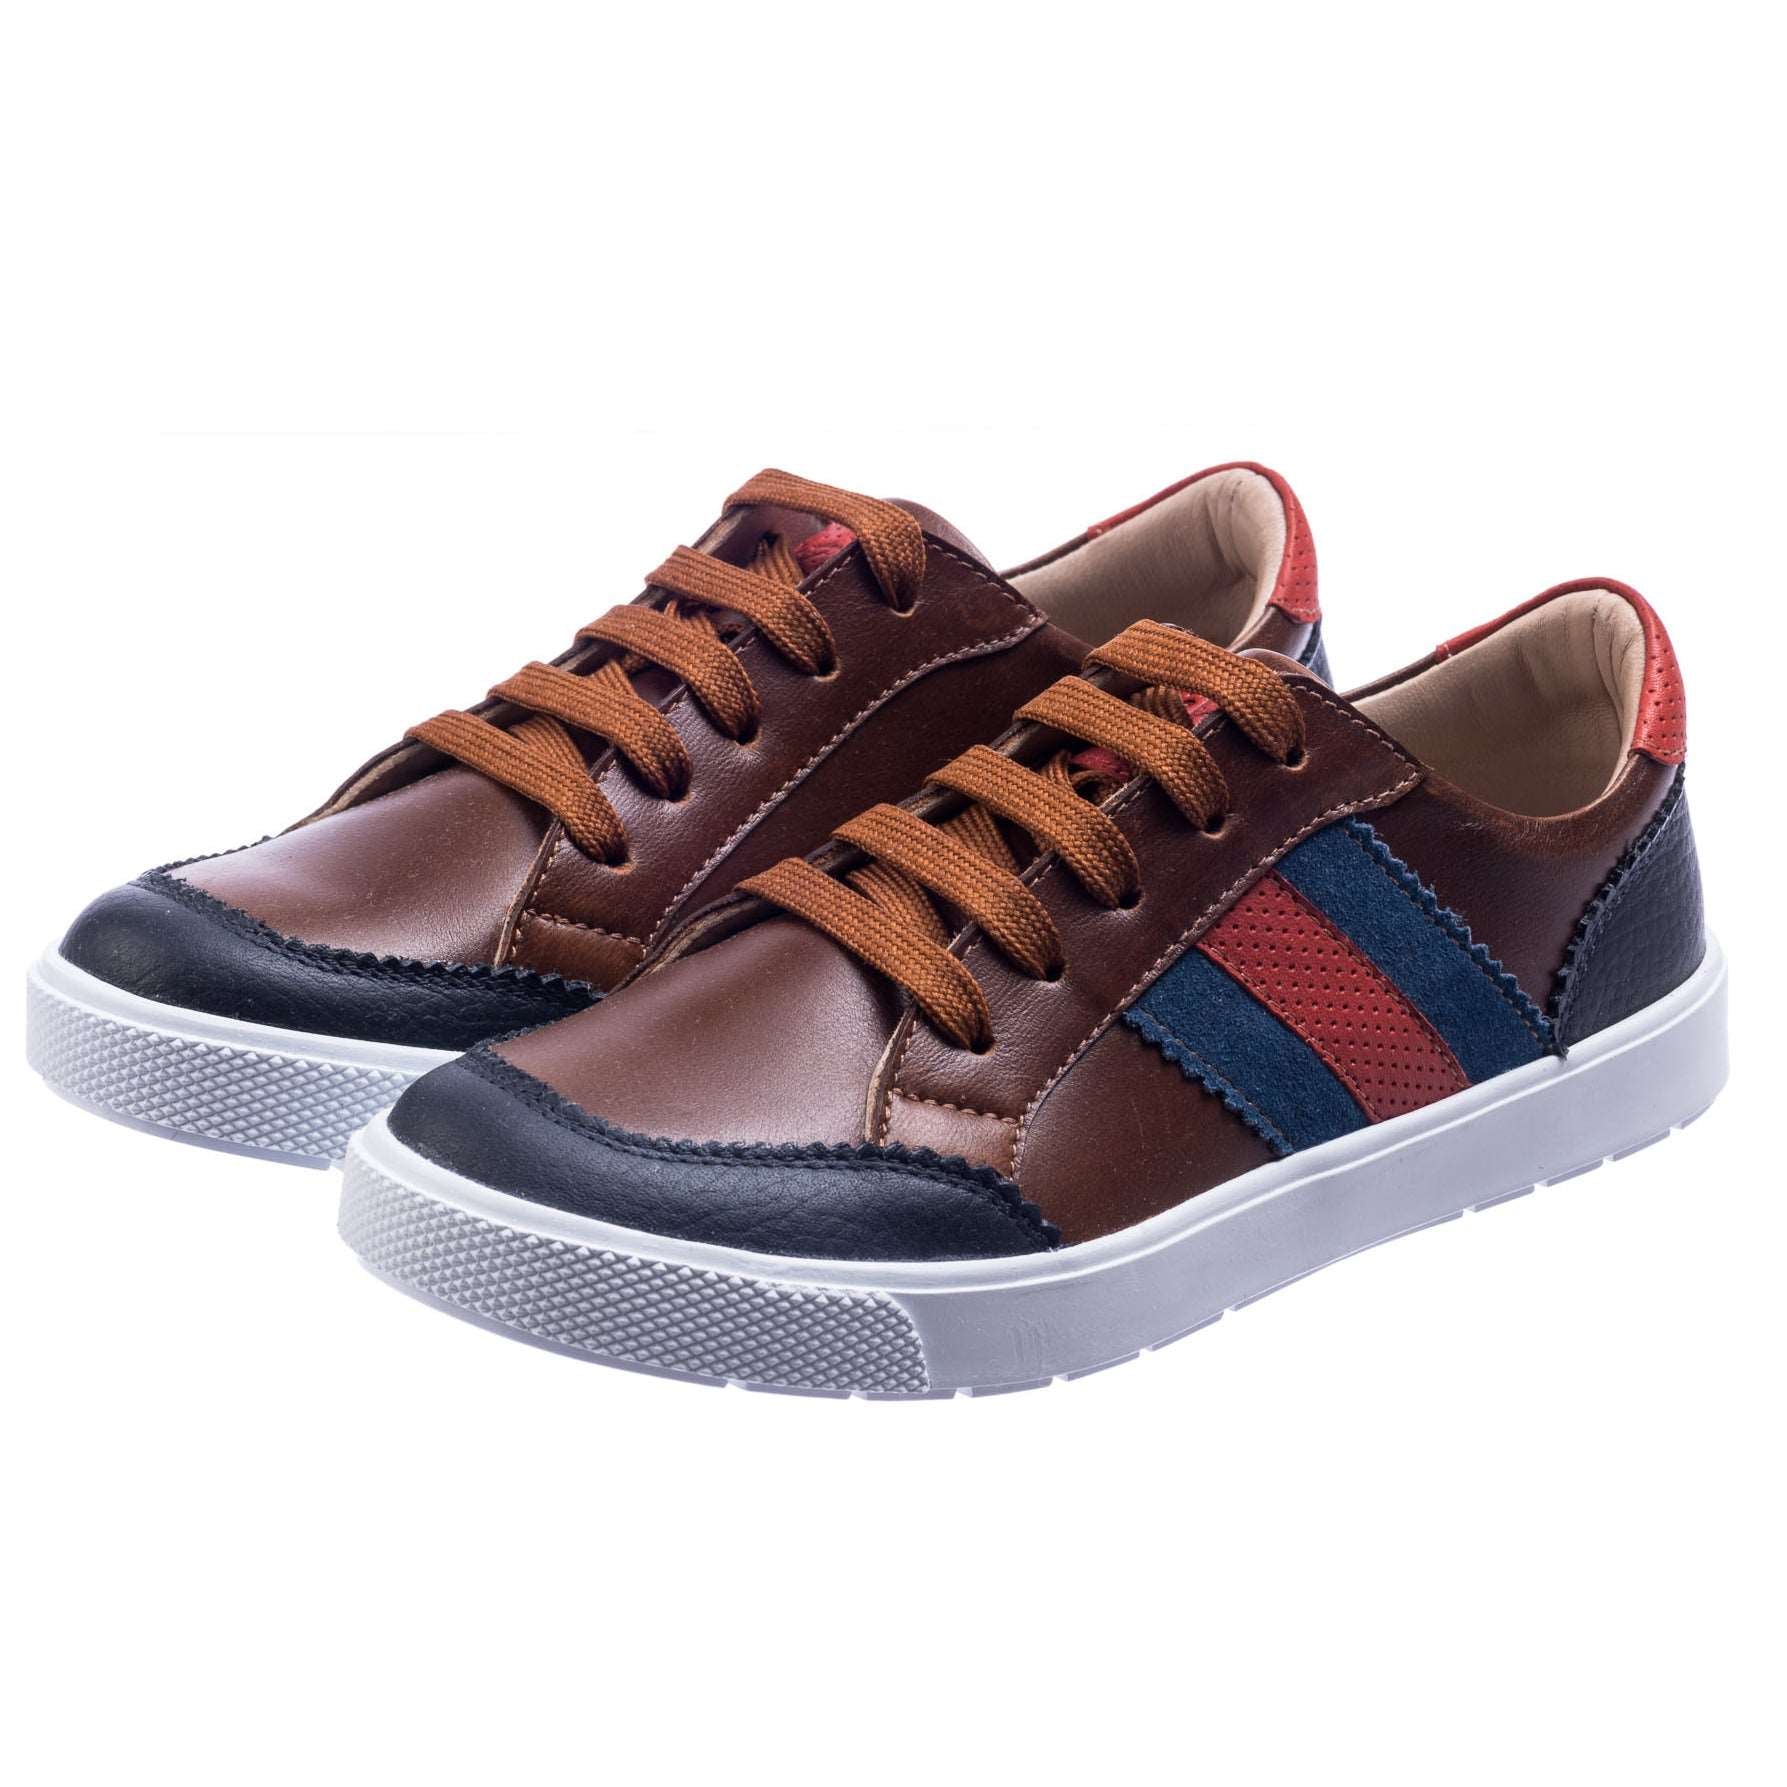 Thesupermade American Hip Hop High Top Casual Sneakers - 1845